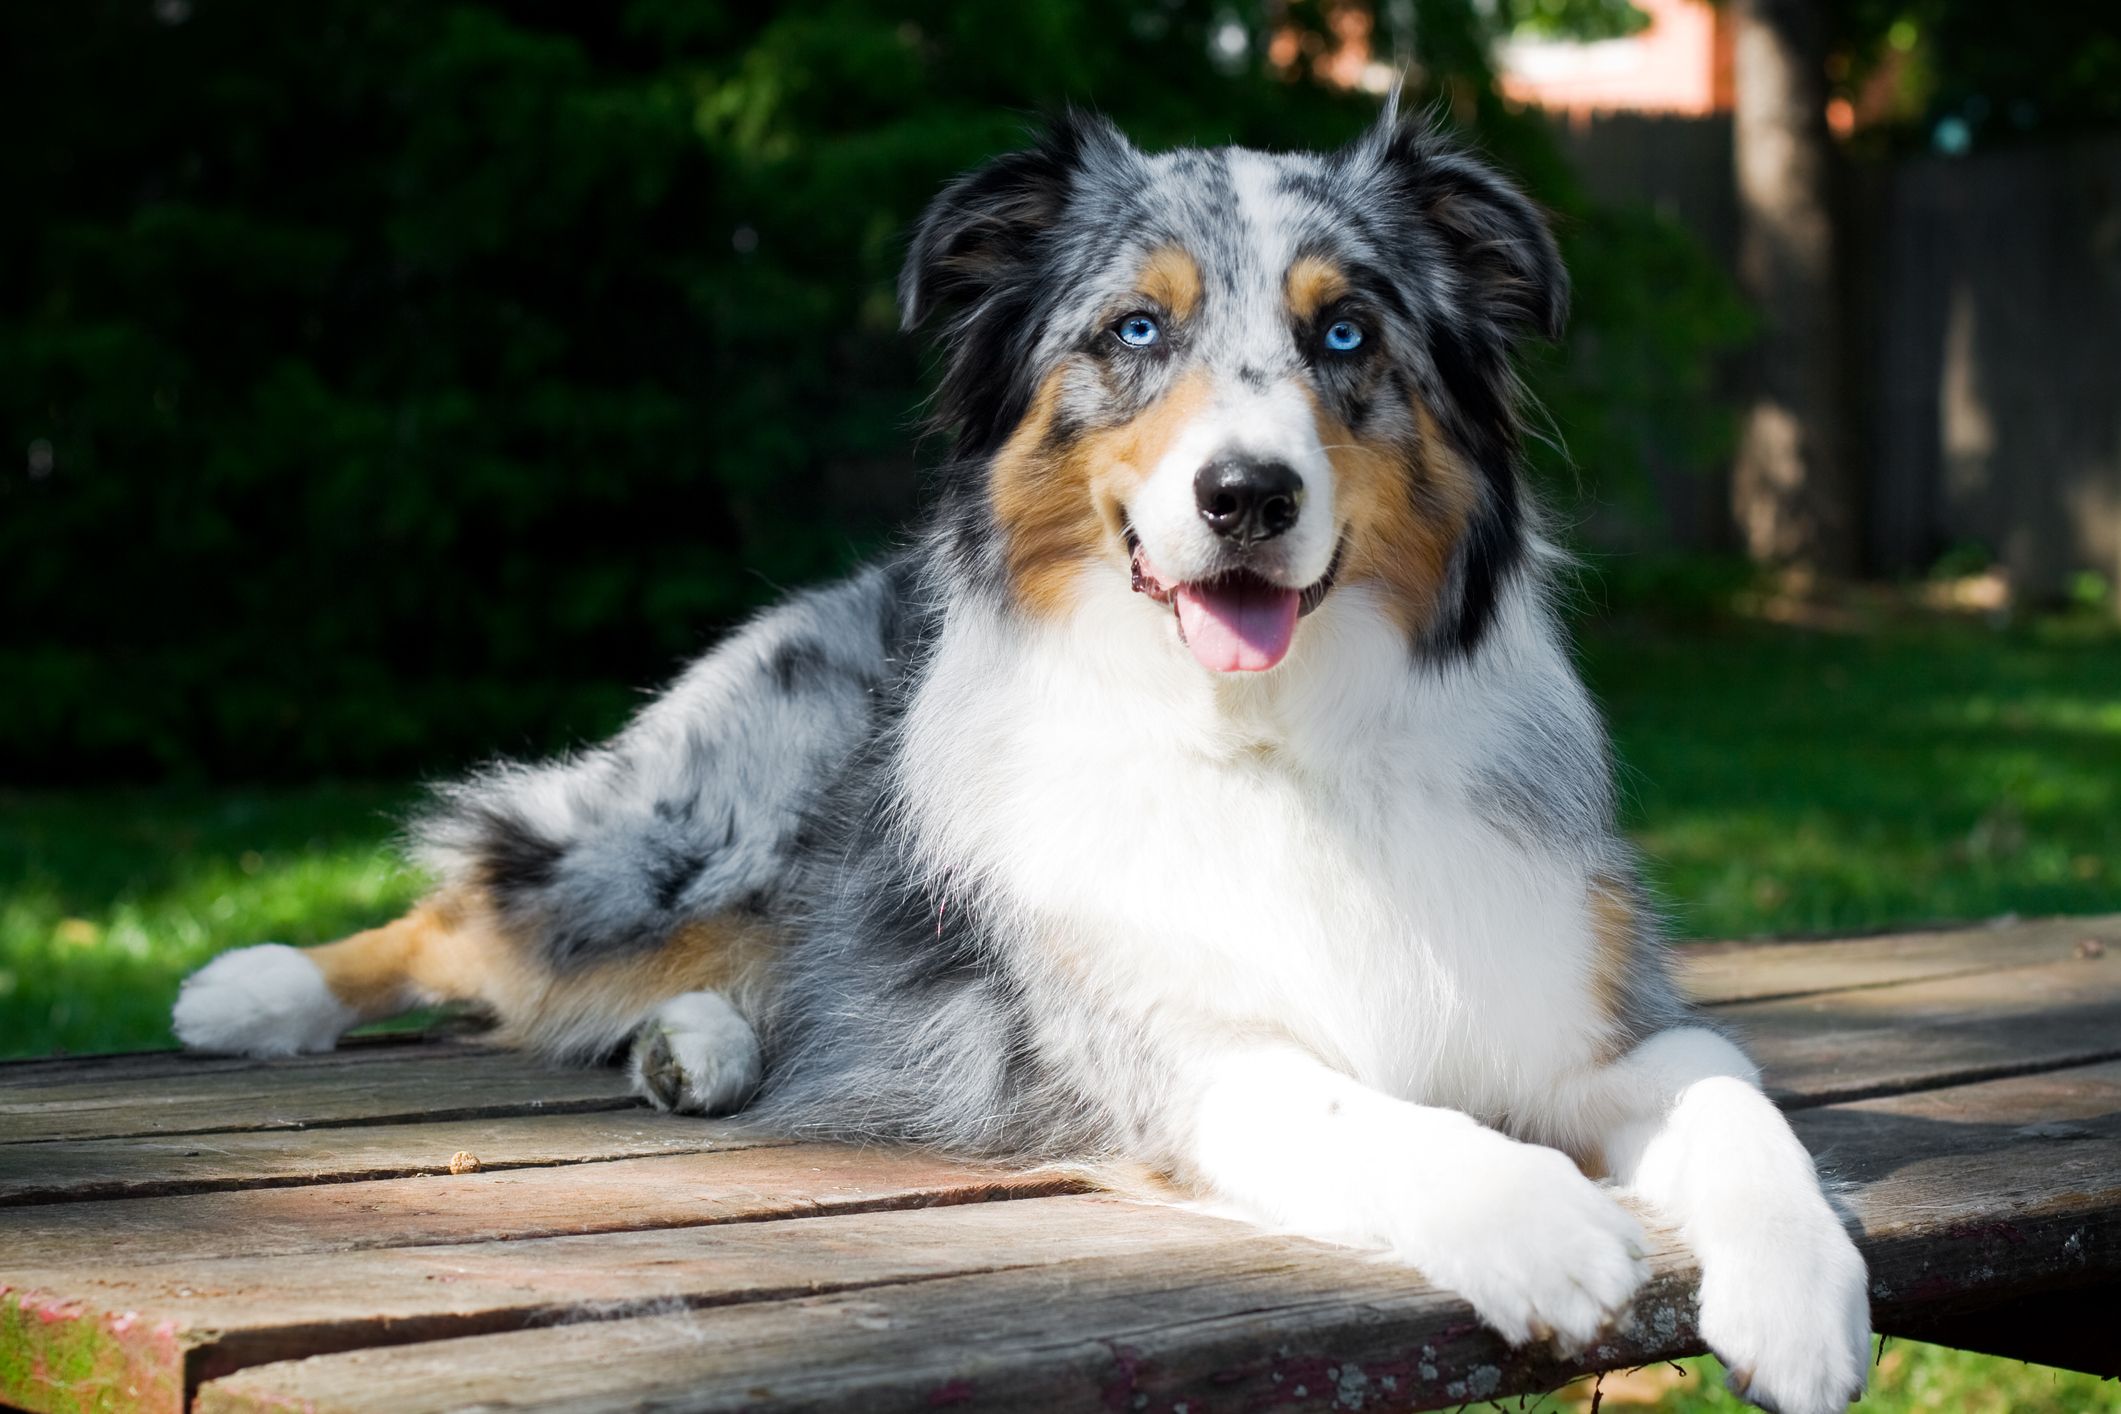 25 Smart Dog Breeds Easy to Train Quickly & Good for First Time Owners